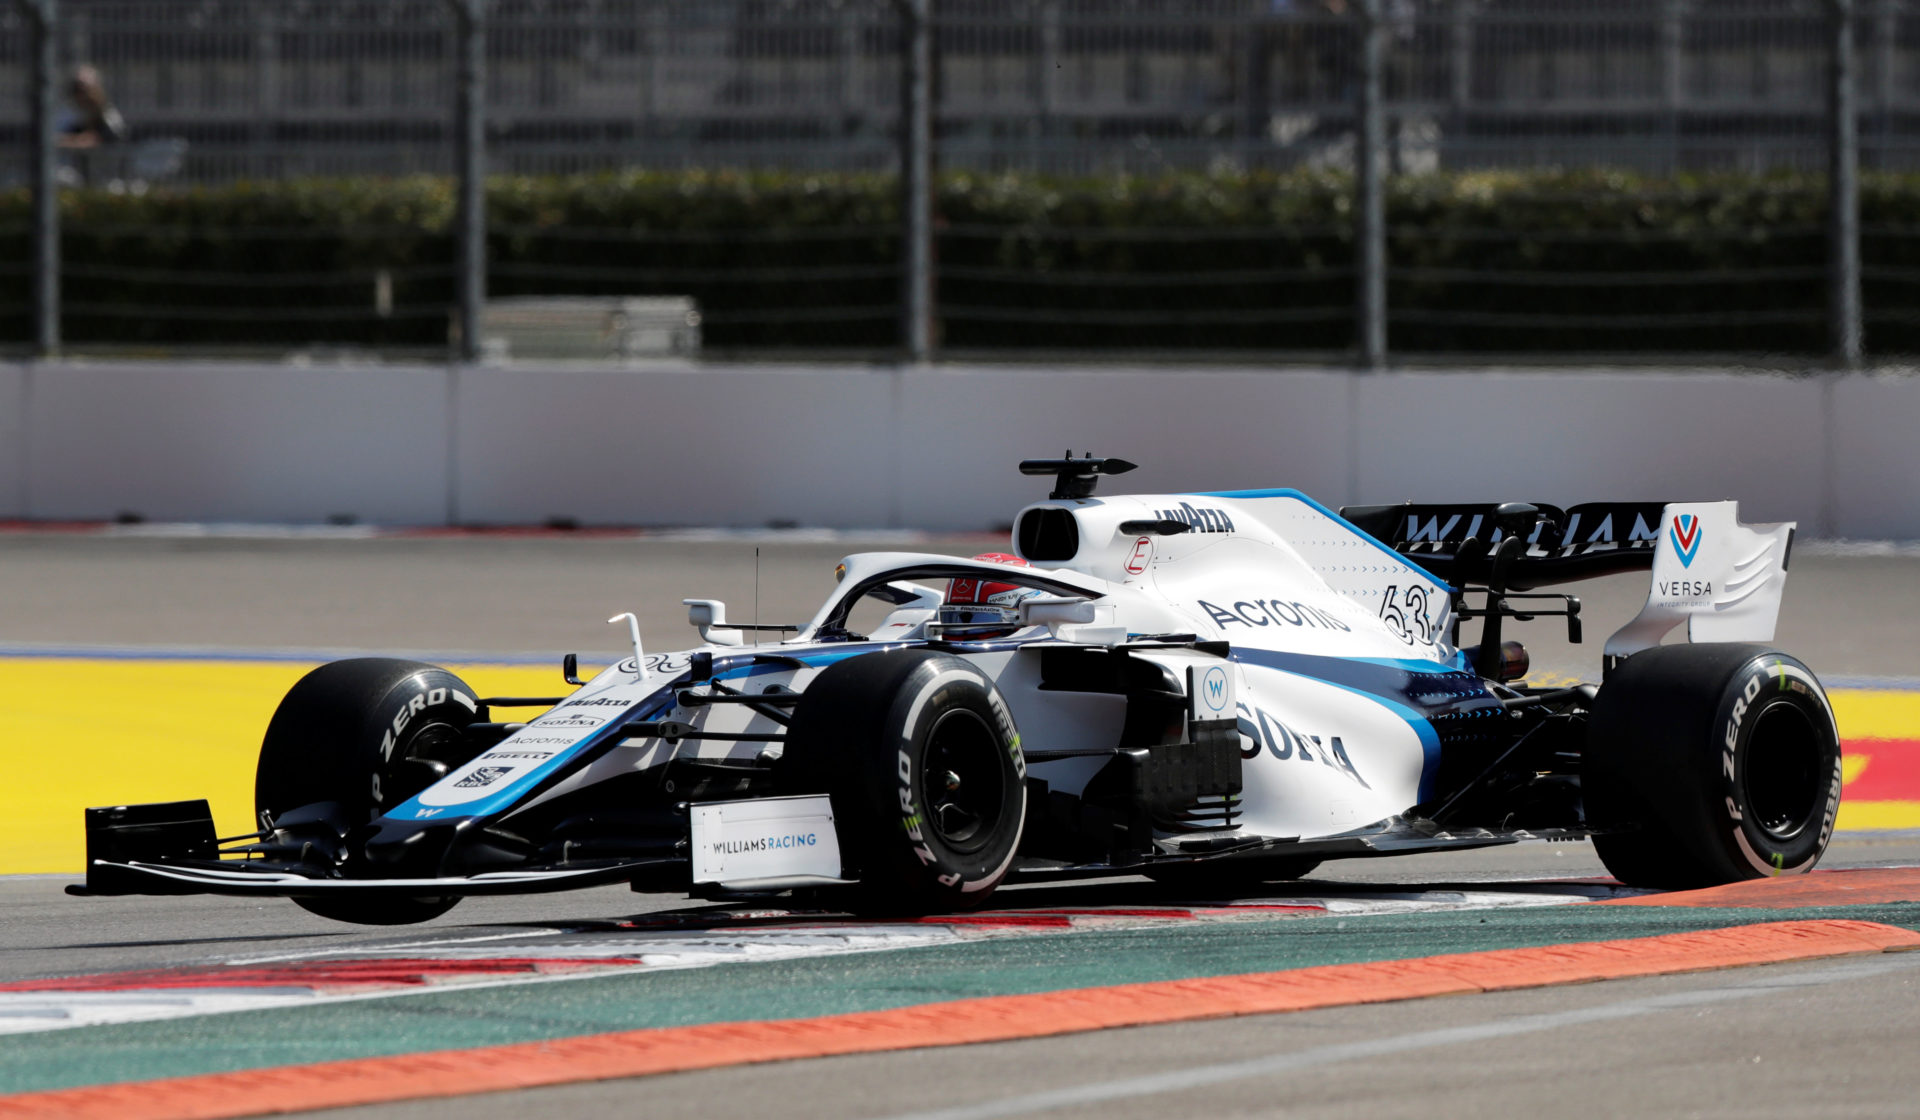 Williams cancel plans to launch their 2021 F1 car after their augmented reality app is hacked